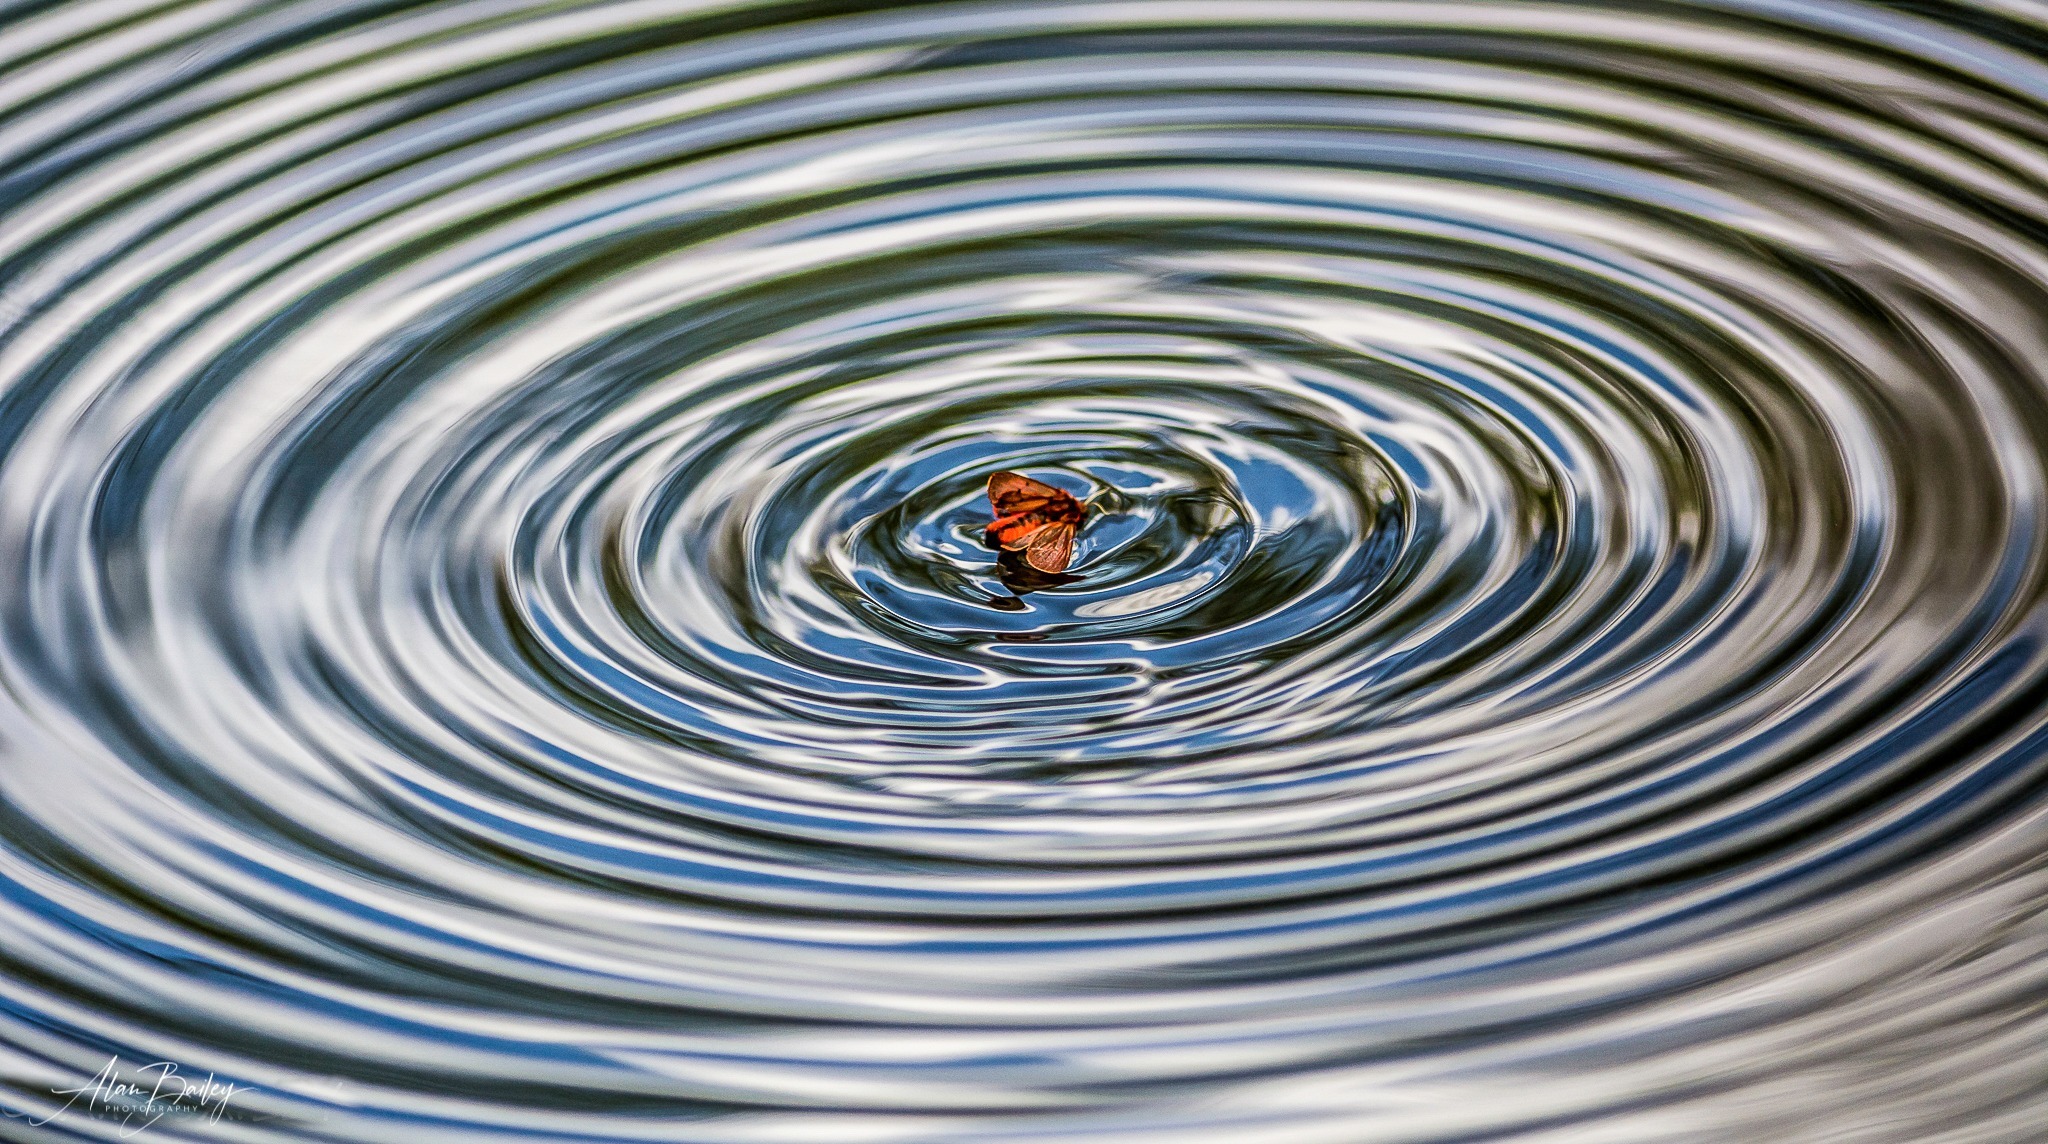 Ripples on the pond by Alan Bailey